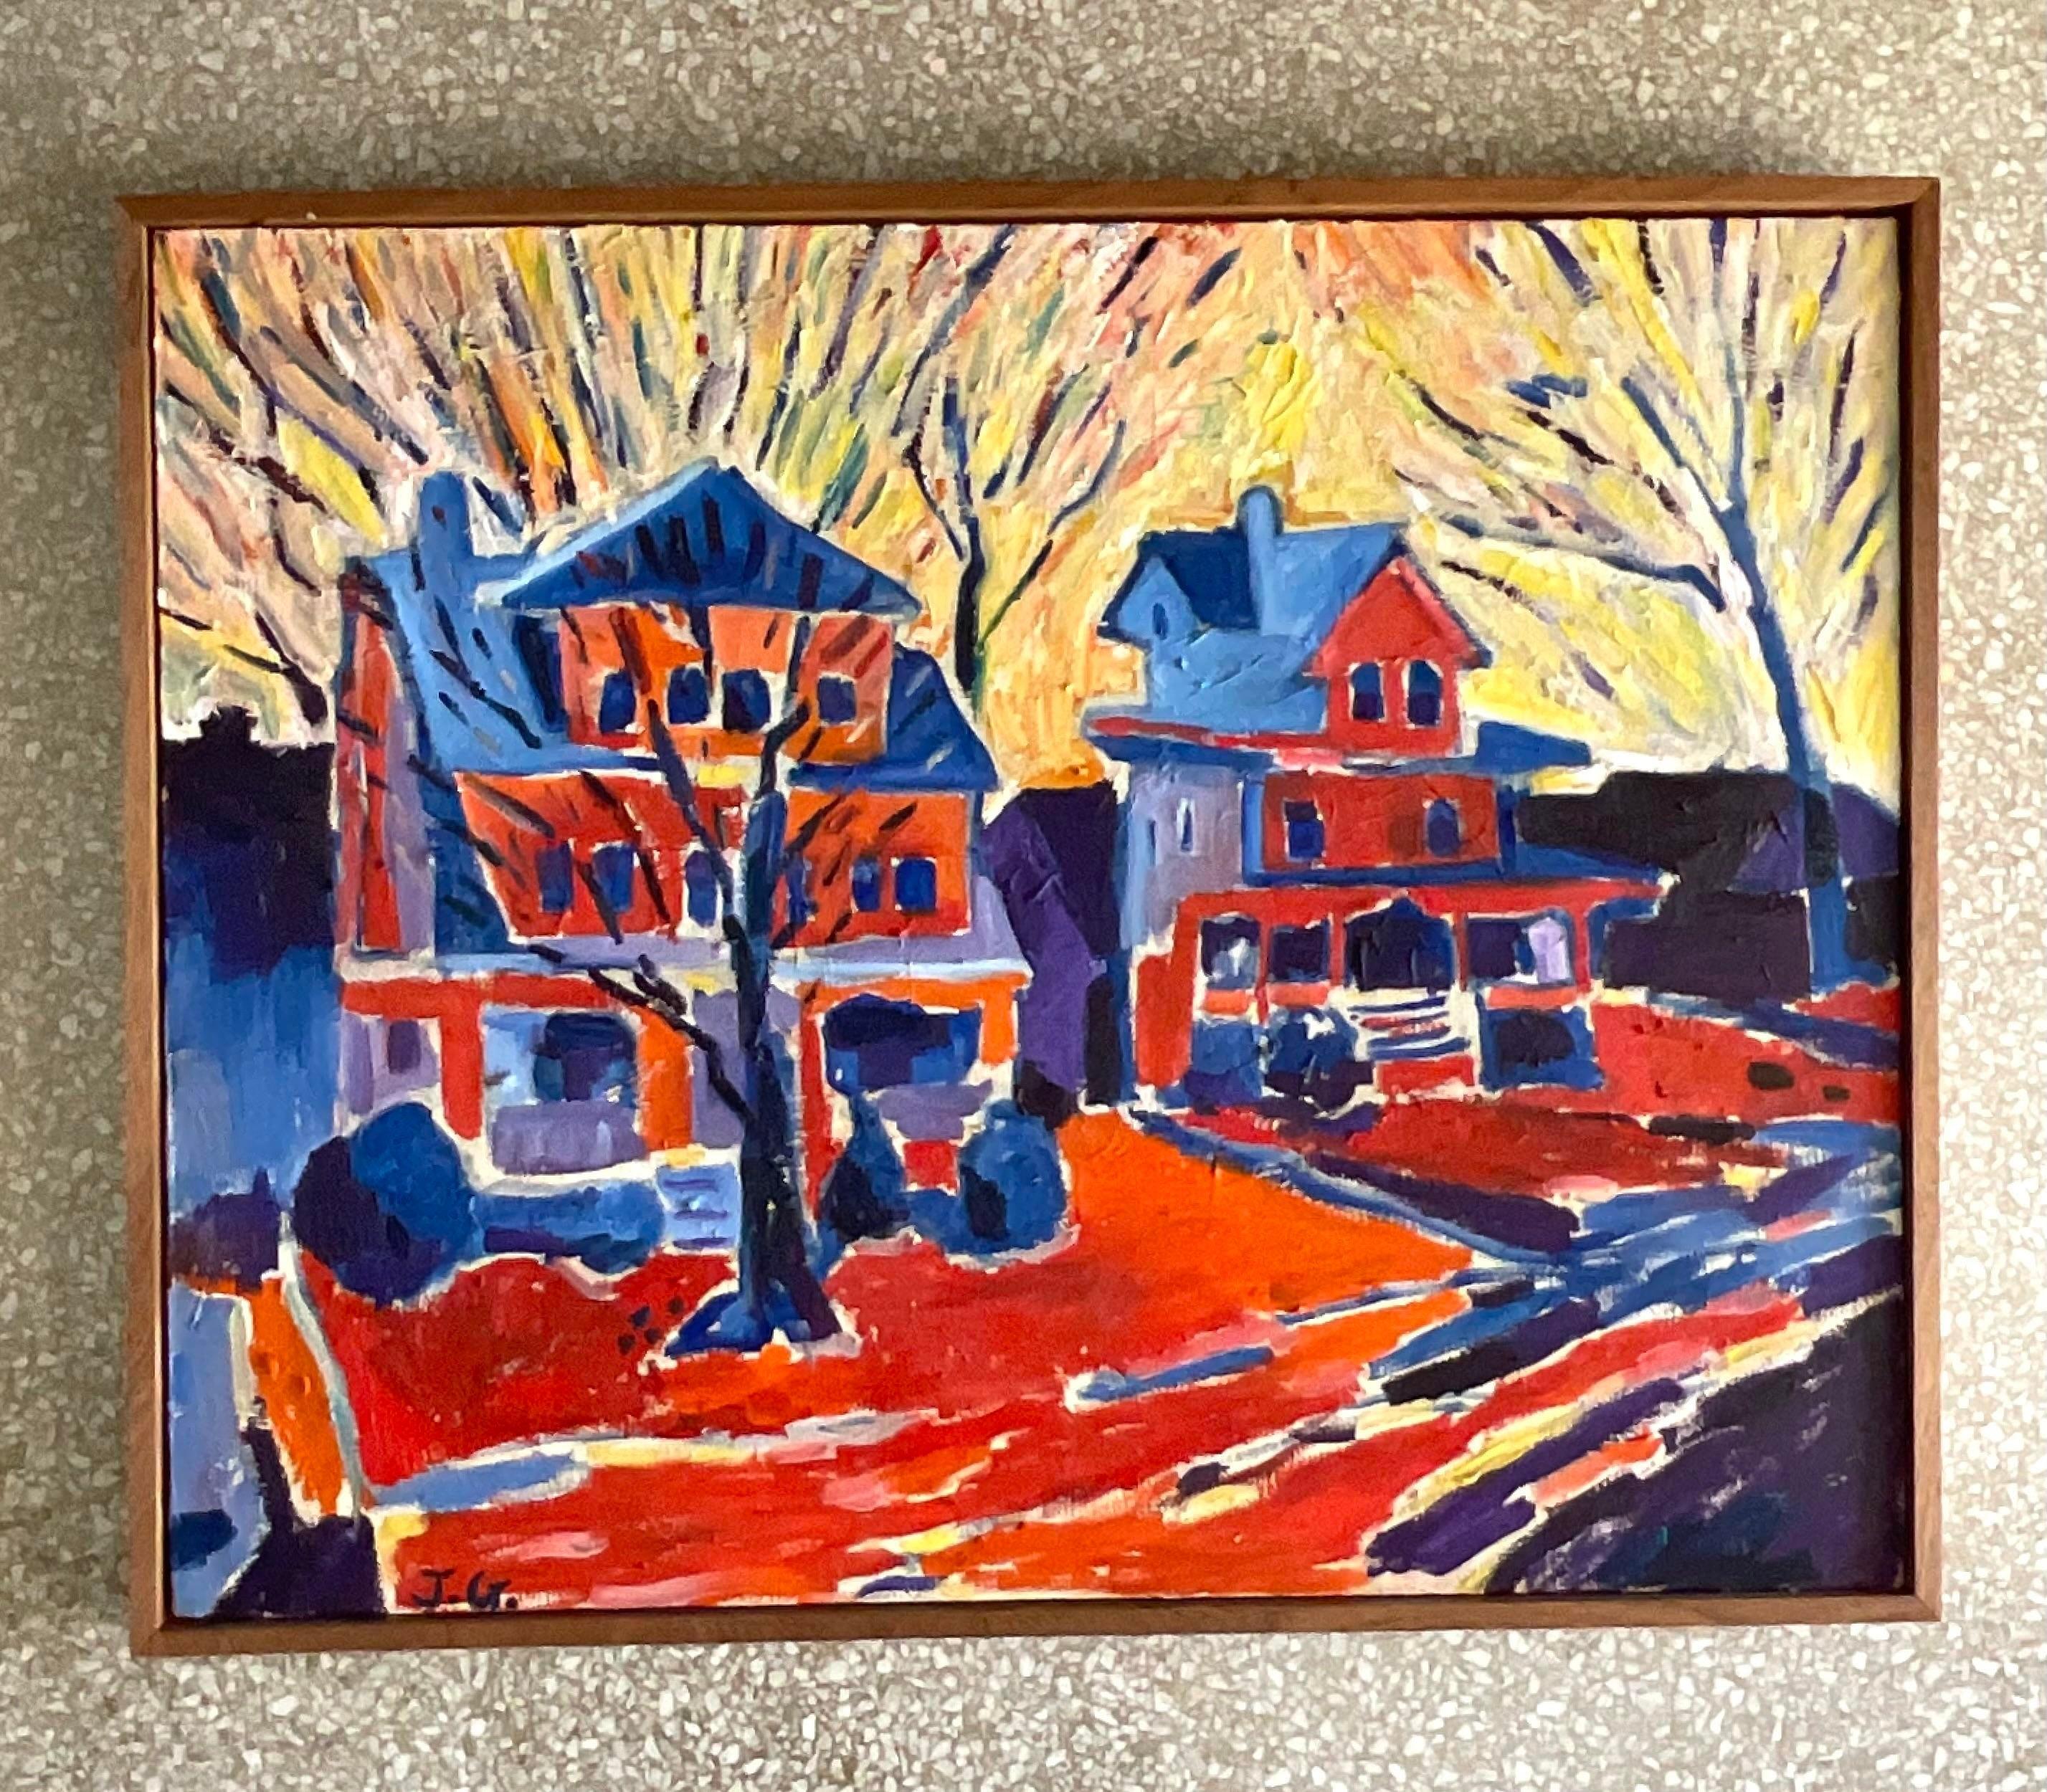 A fantastic vintage Boho original oil painting on canvas. A chic Abstract Expressionist composition in radiant colors. A brilliant work. Acquired from a NJ estate.